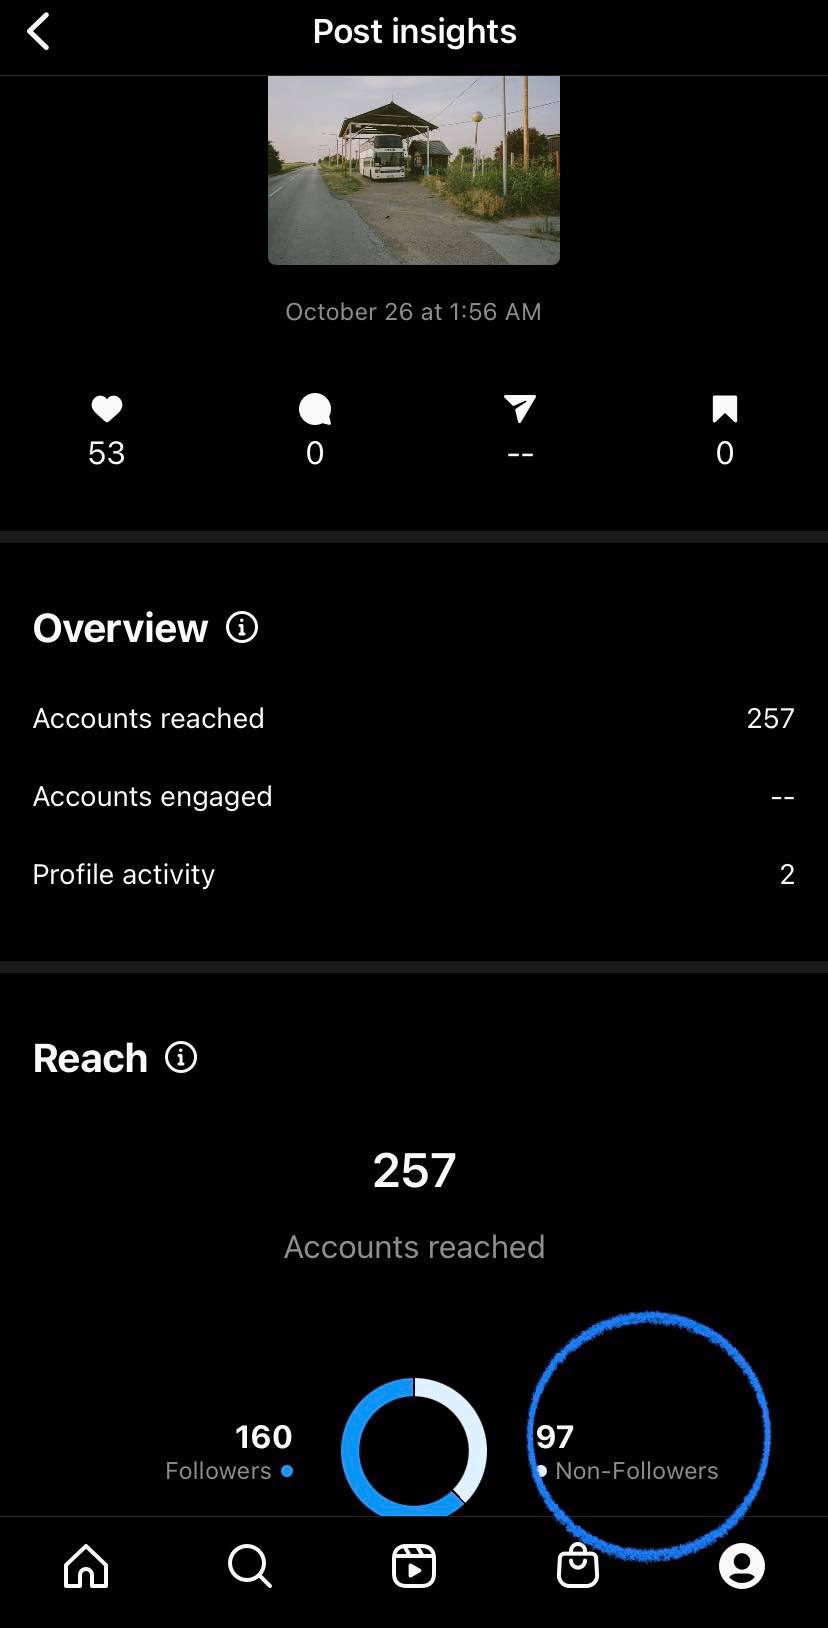 Instagram Stats of my image and flickr stats for photographers